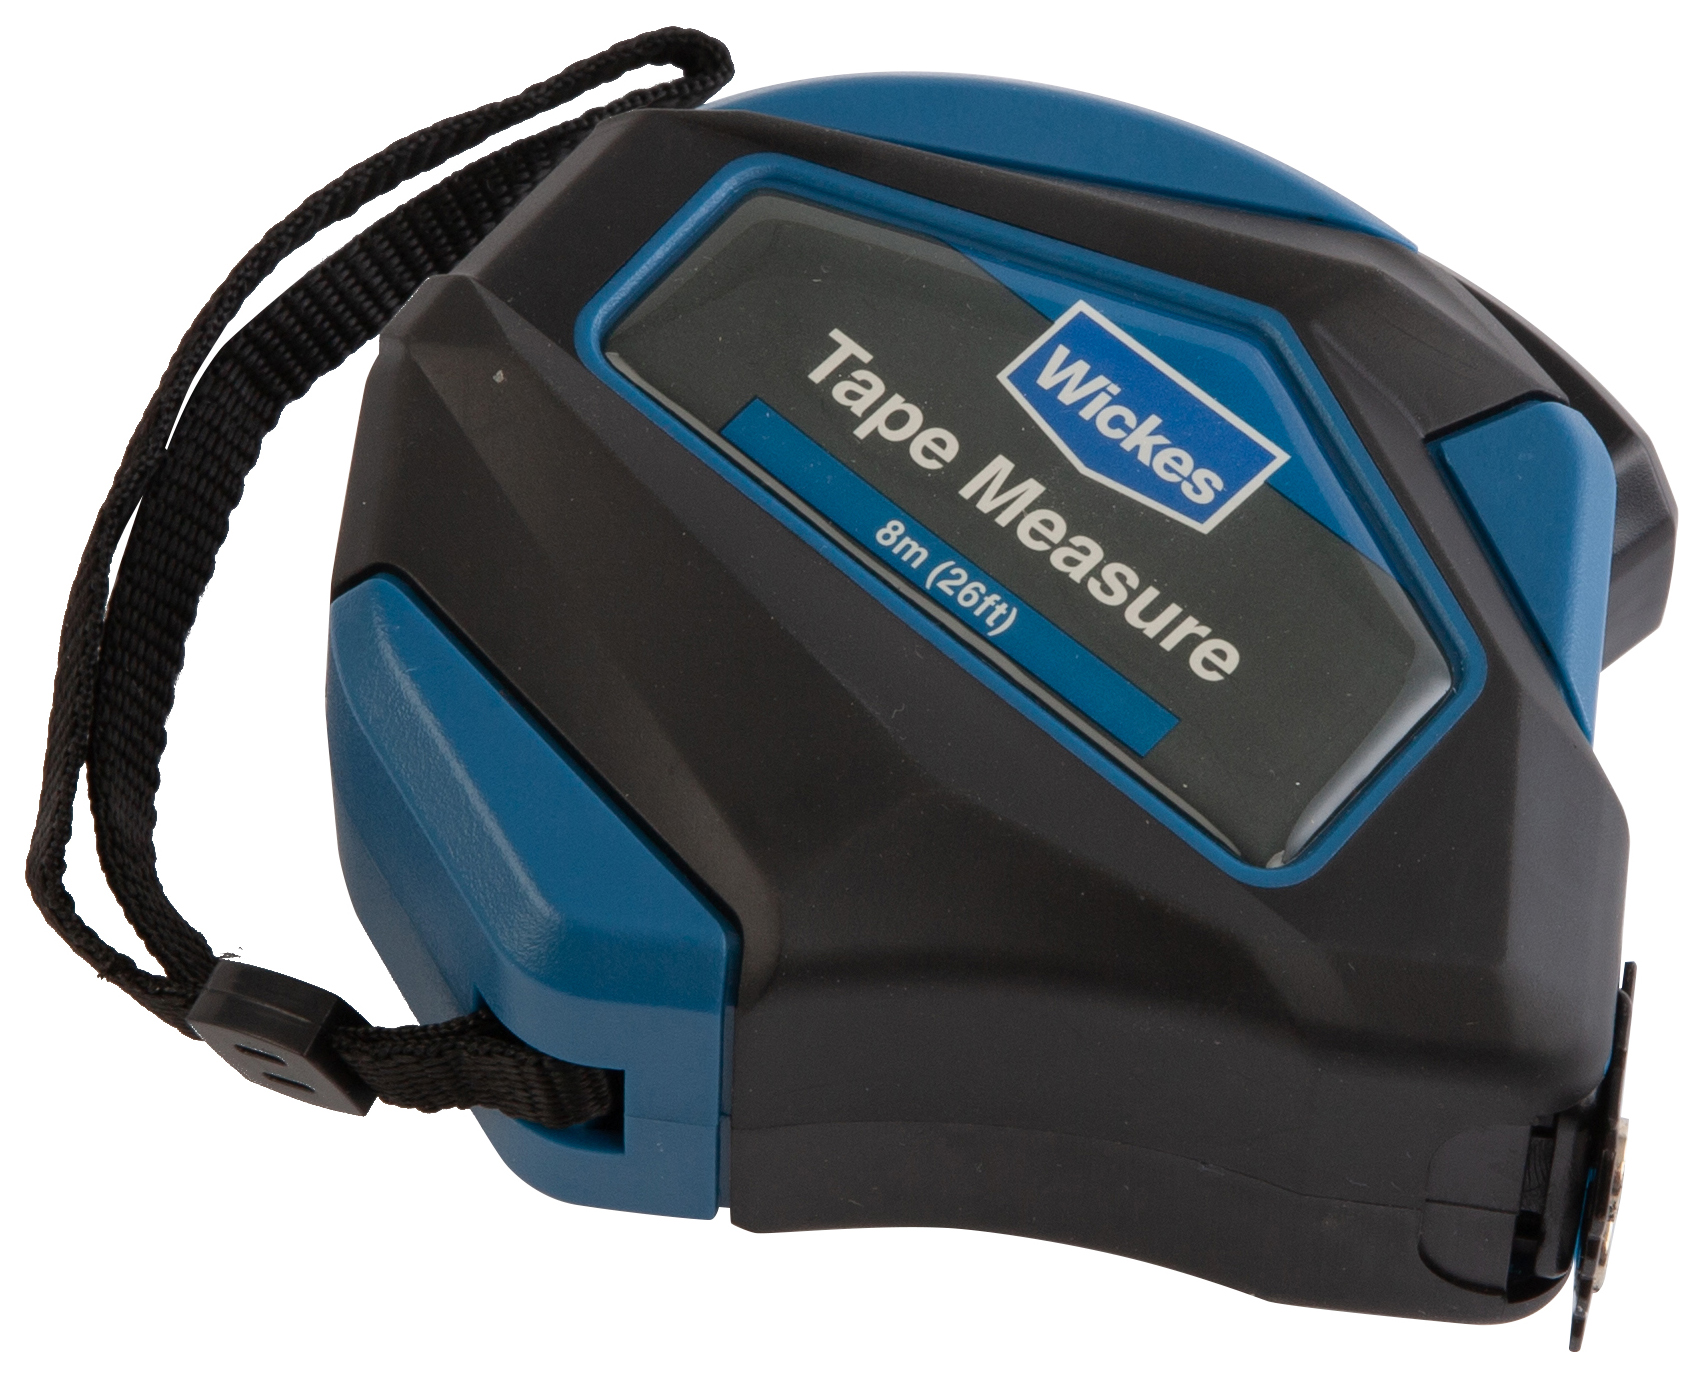 Wickes Rugged Tape Measure - 8m / 26ft